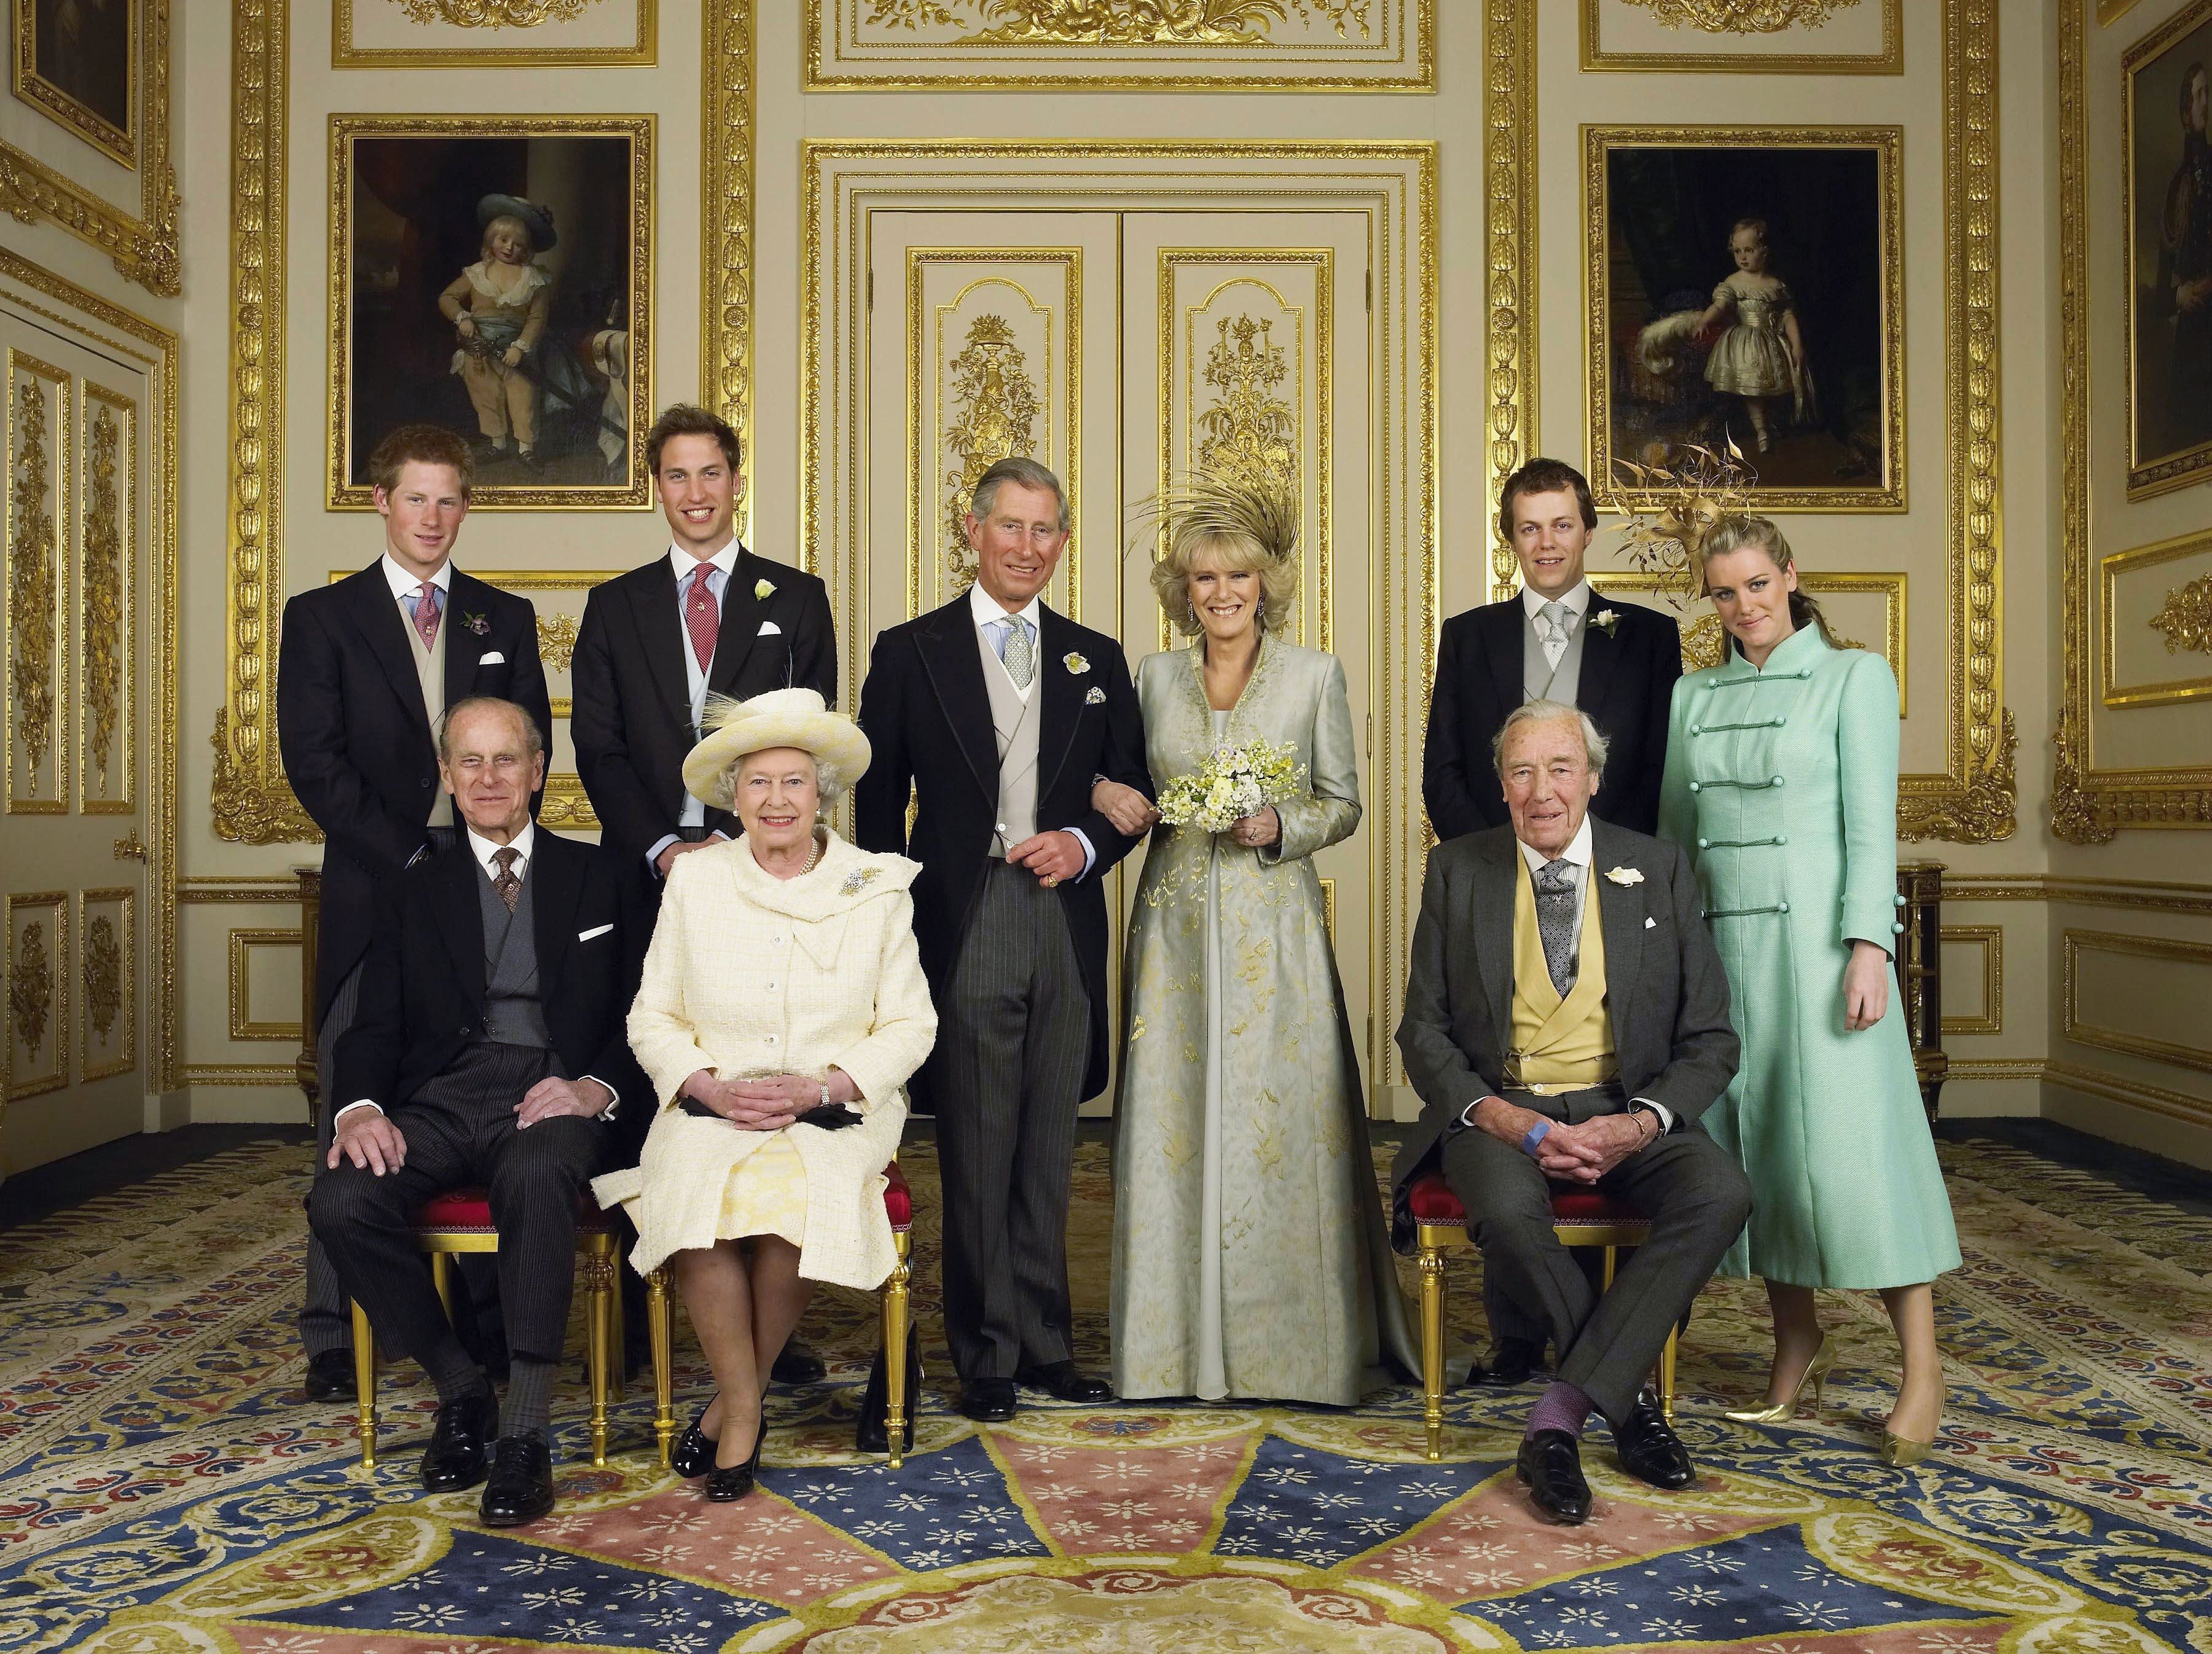 the Prince of Wales and his new bride Camilla, Duchess of Cornwall, with their families (L-R back row) Prince Harry, Prince William, Tom and Laura Parker Bowles (L-R front row) Duke of Edinburgh, Britain's Queen Elizabeth II and Camilla's father Major Bruce Shand, in the White Drawing Room at Windsor Castle after their wedding ceremony, April 9, 2005 in Windsor, England